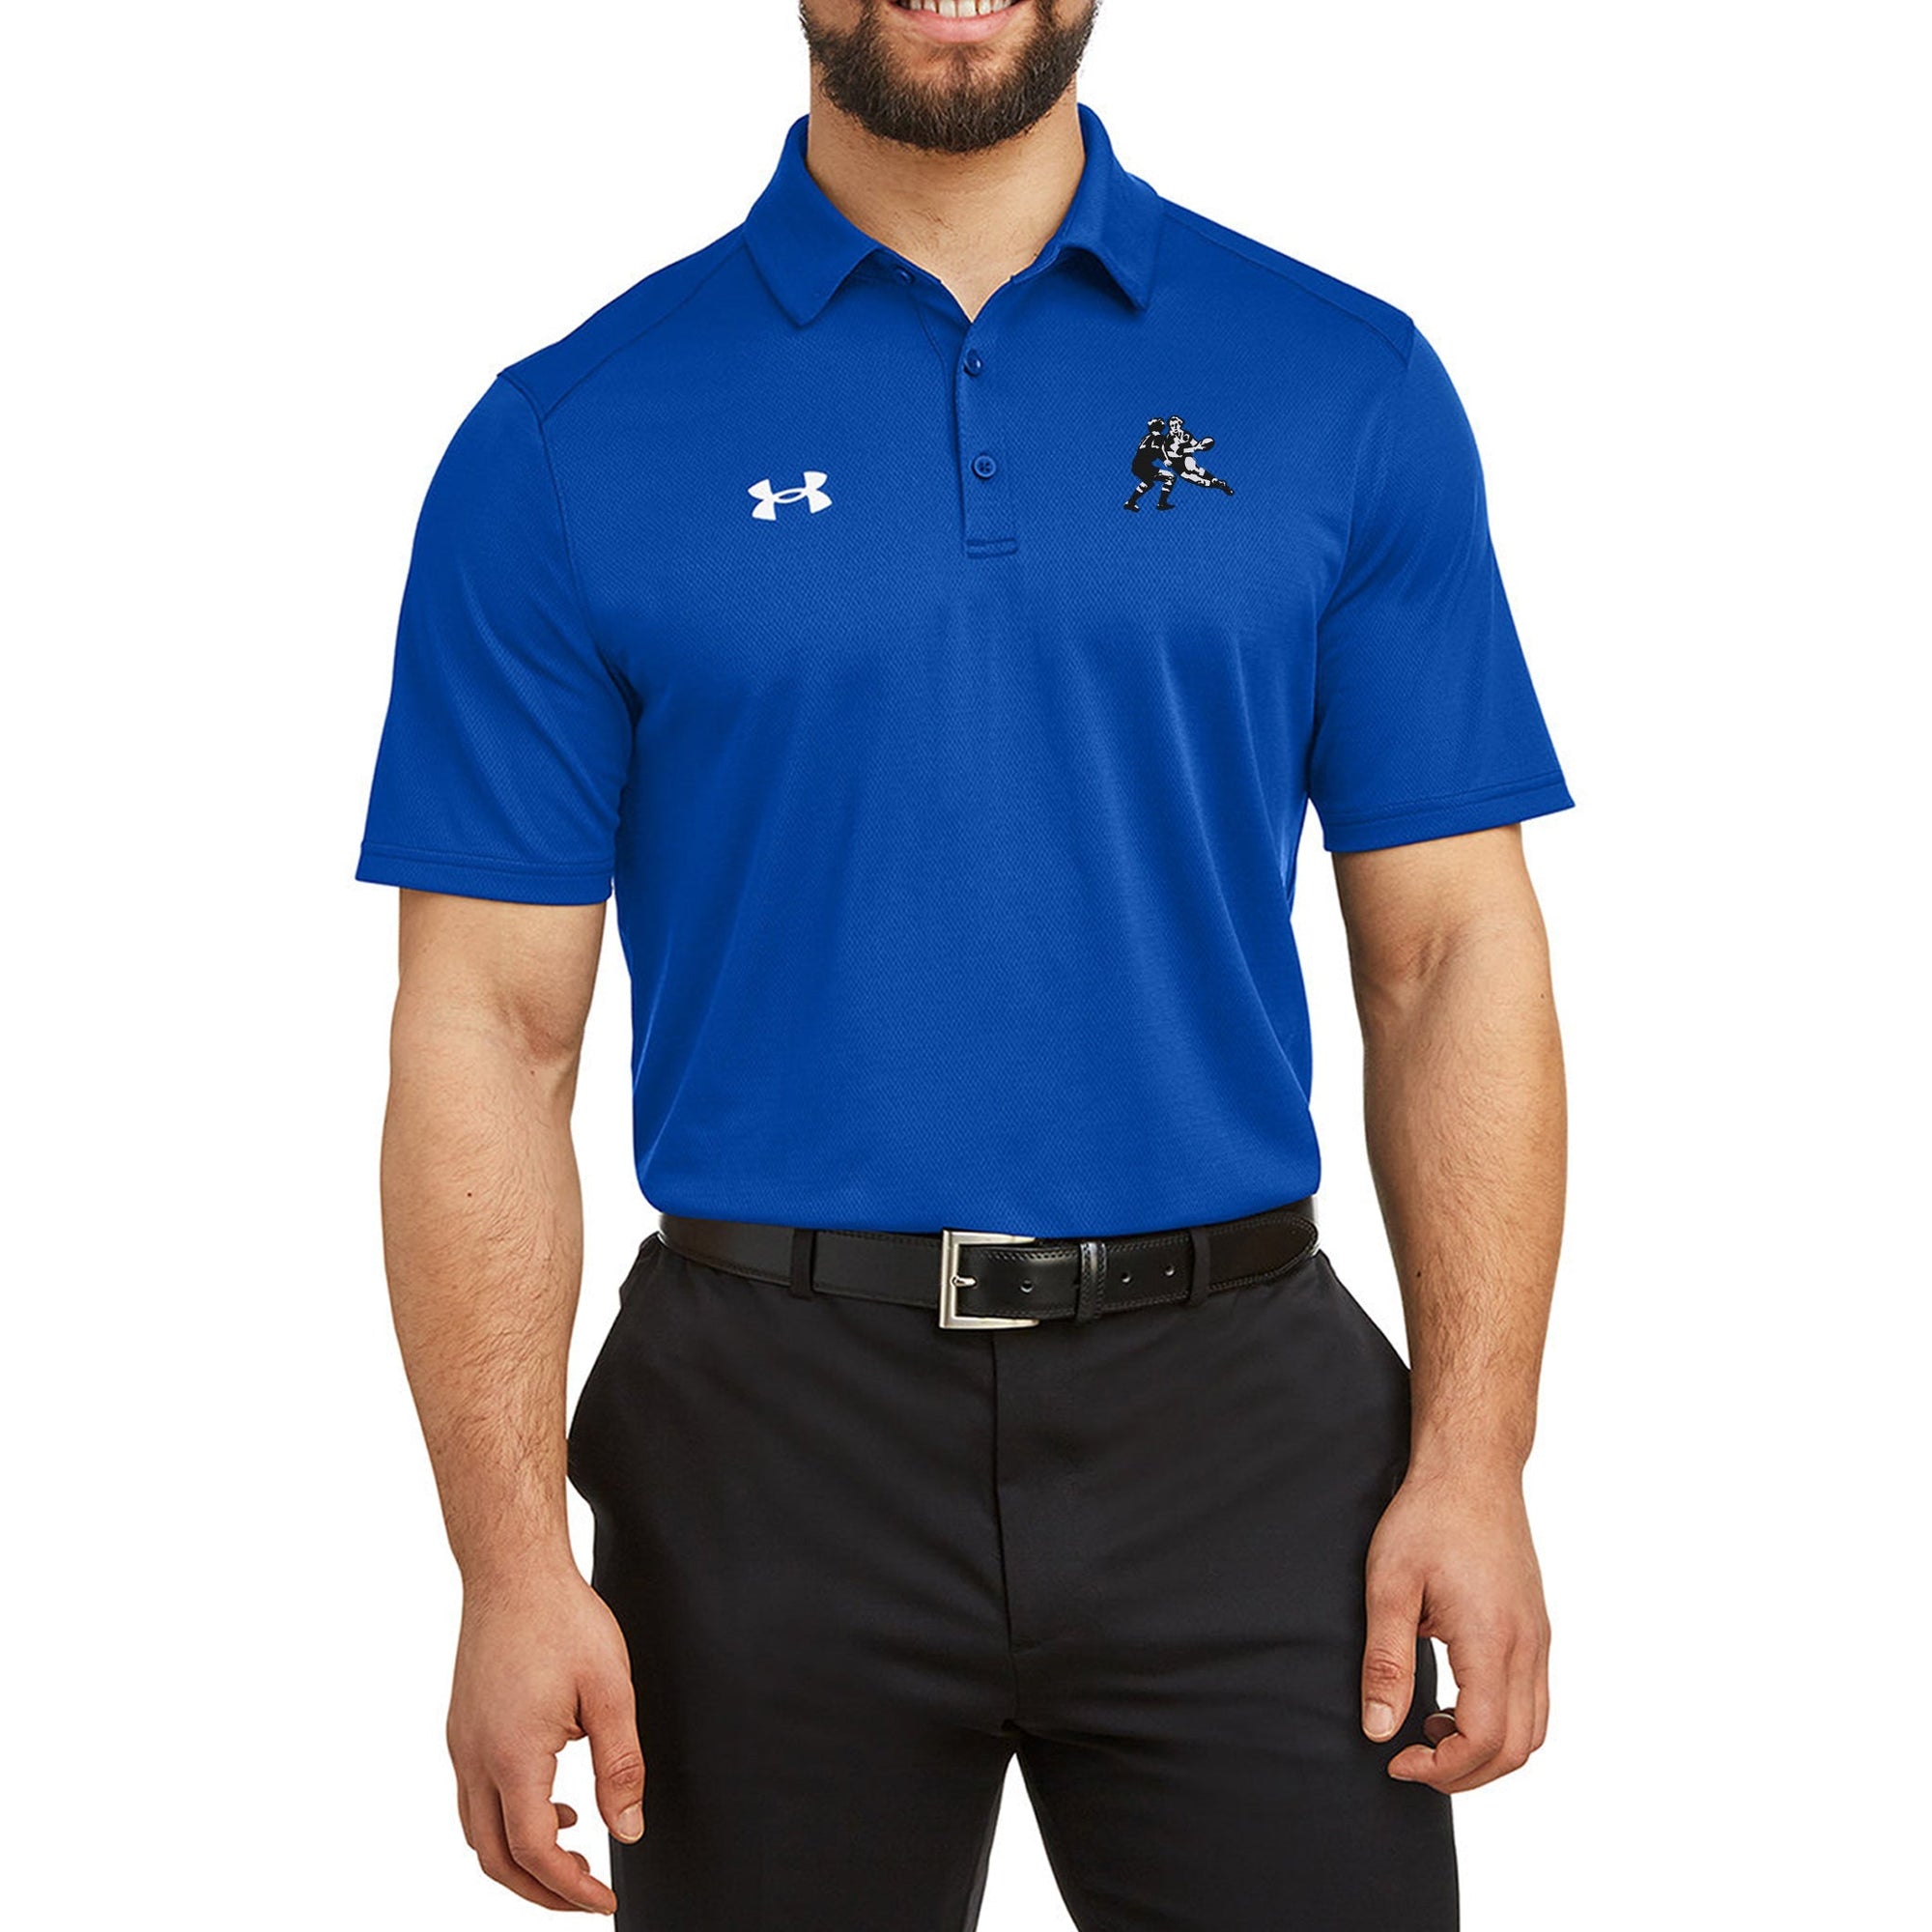 Rugby Imports Rugby Imports UA Team Tech Polo